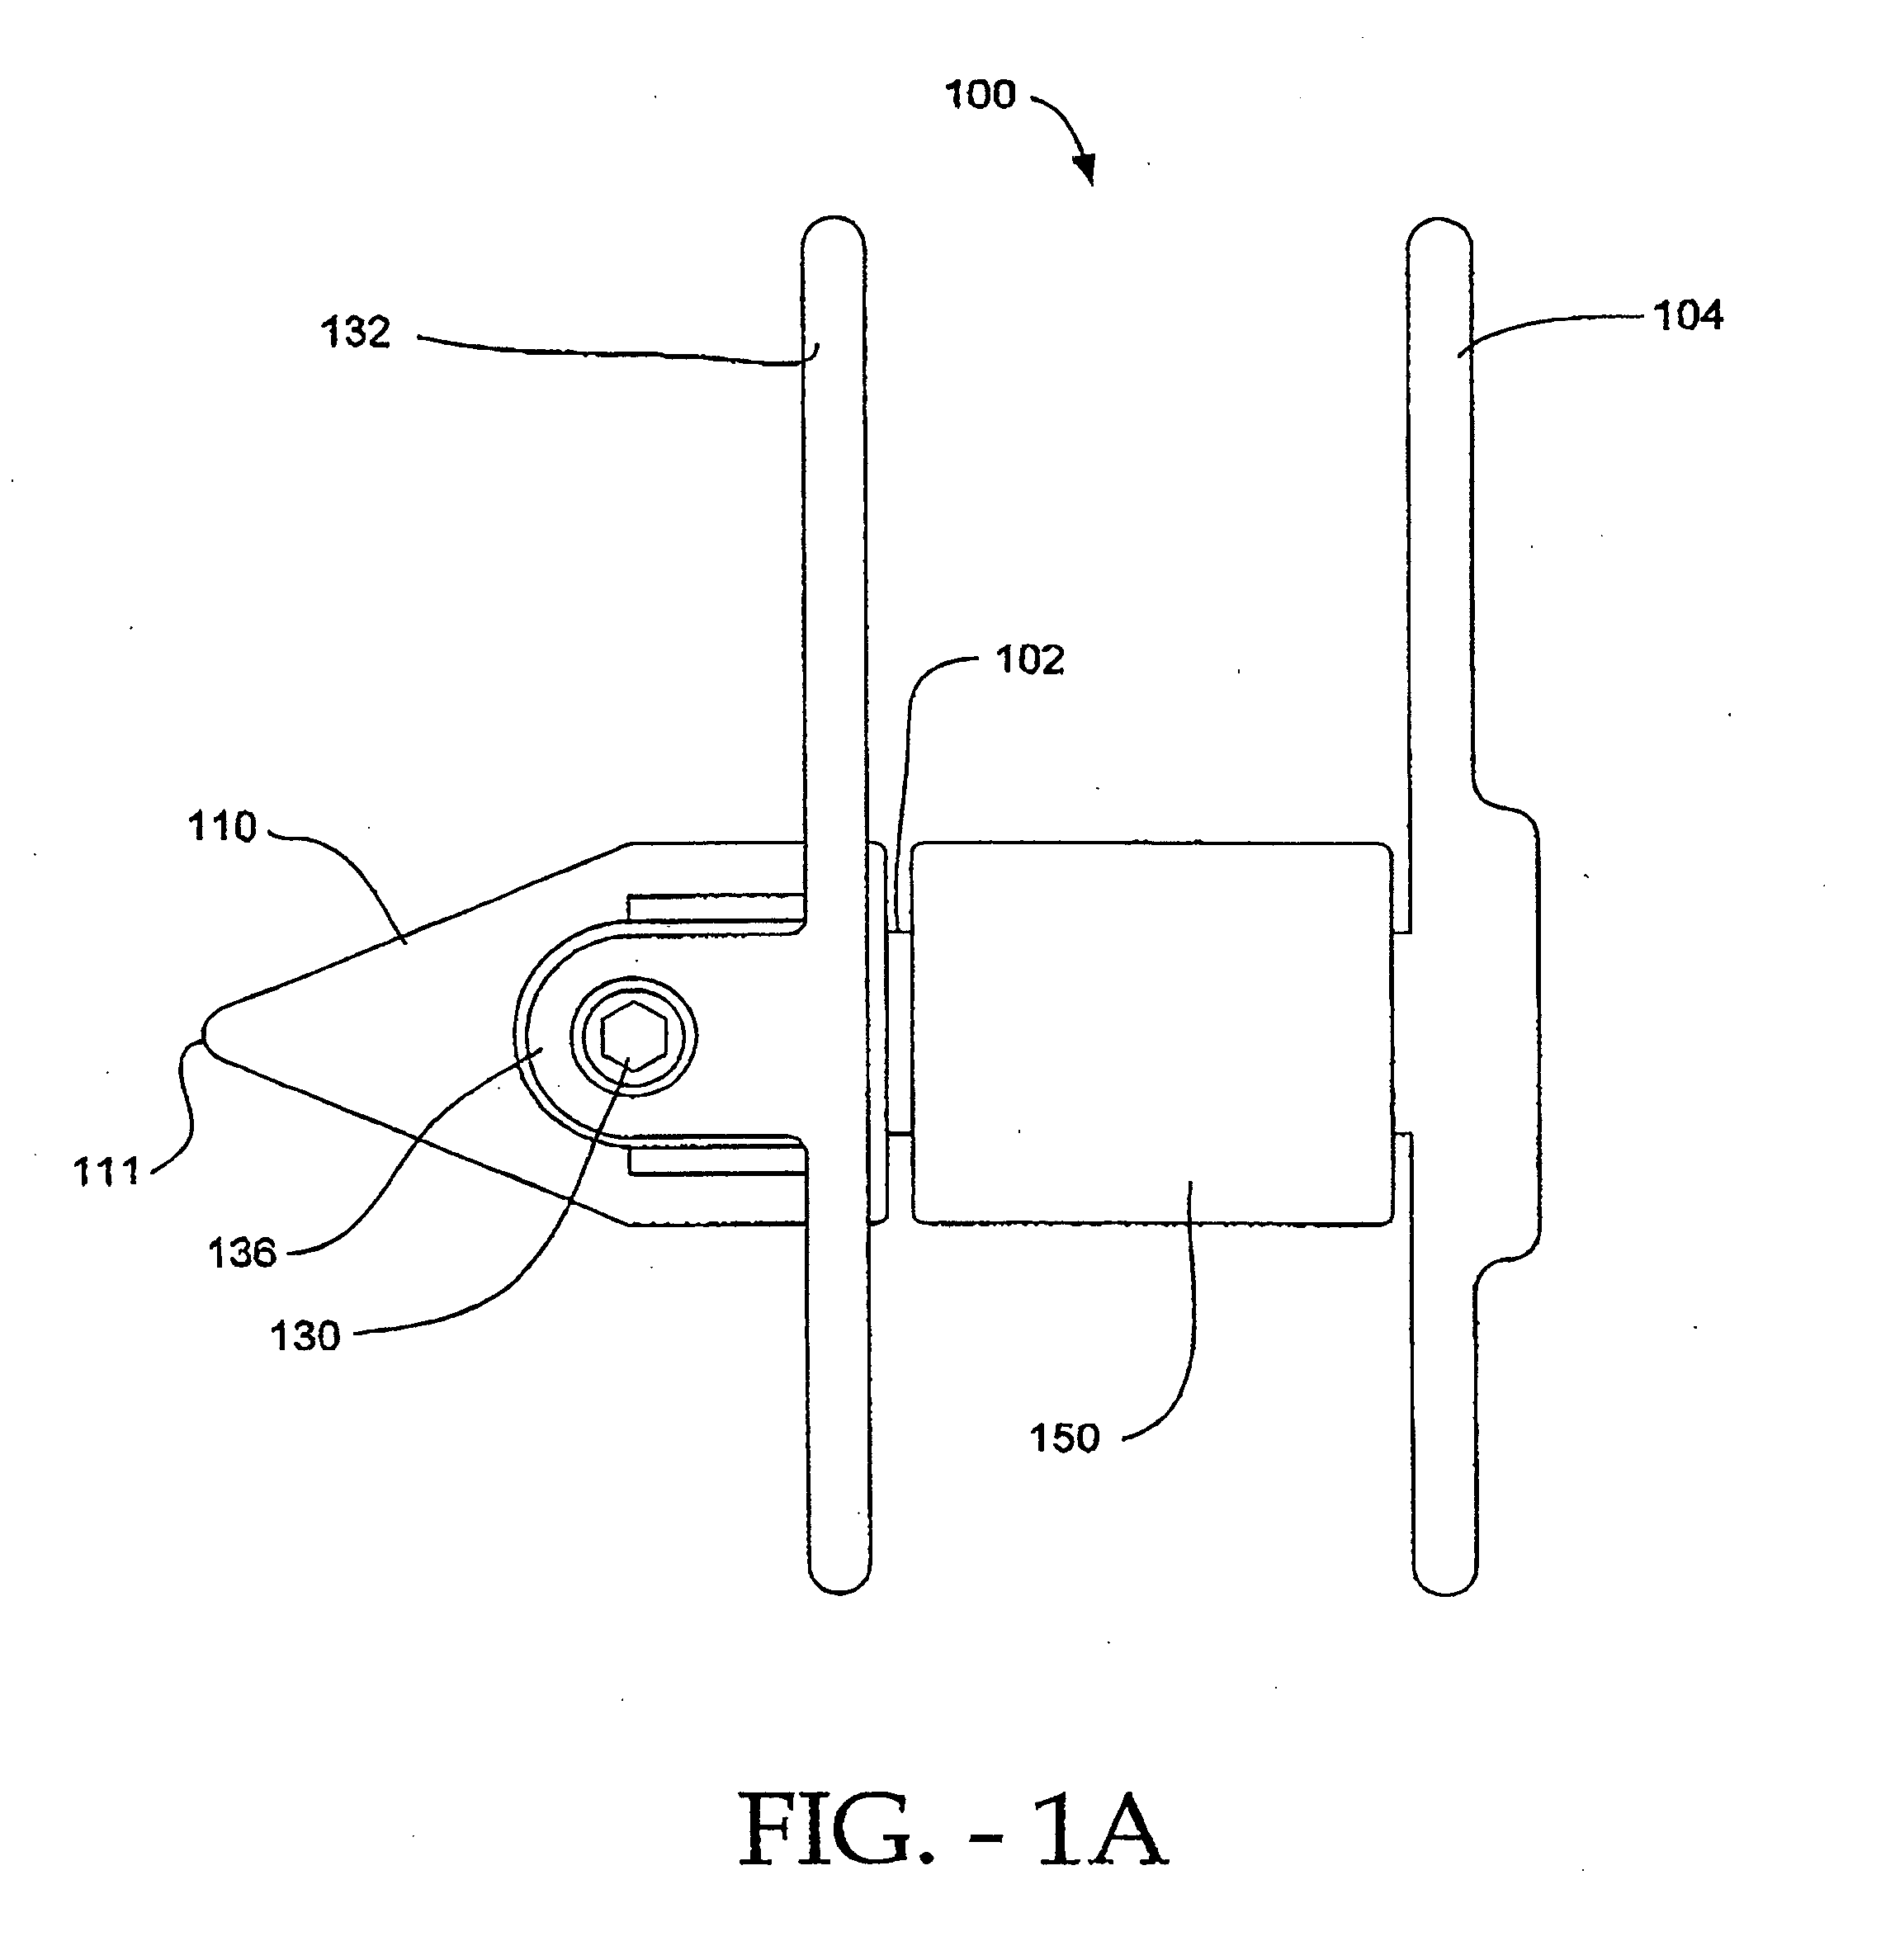 Interspinous process implant with radiolucent spacer and lead-in tissue expander